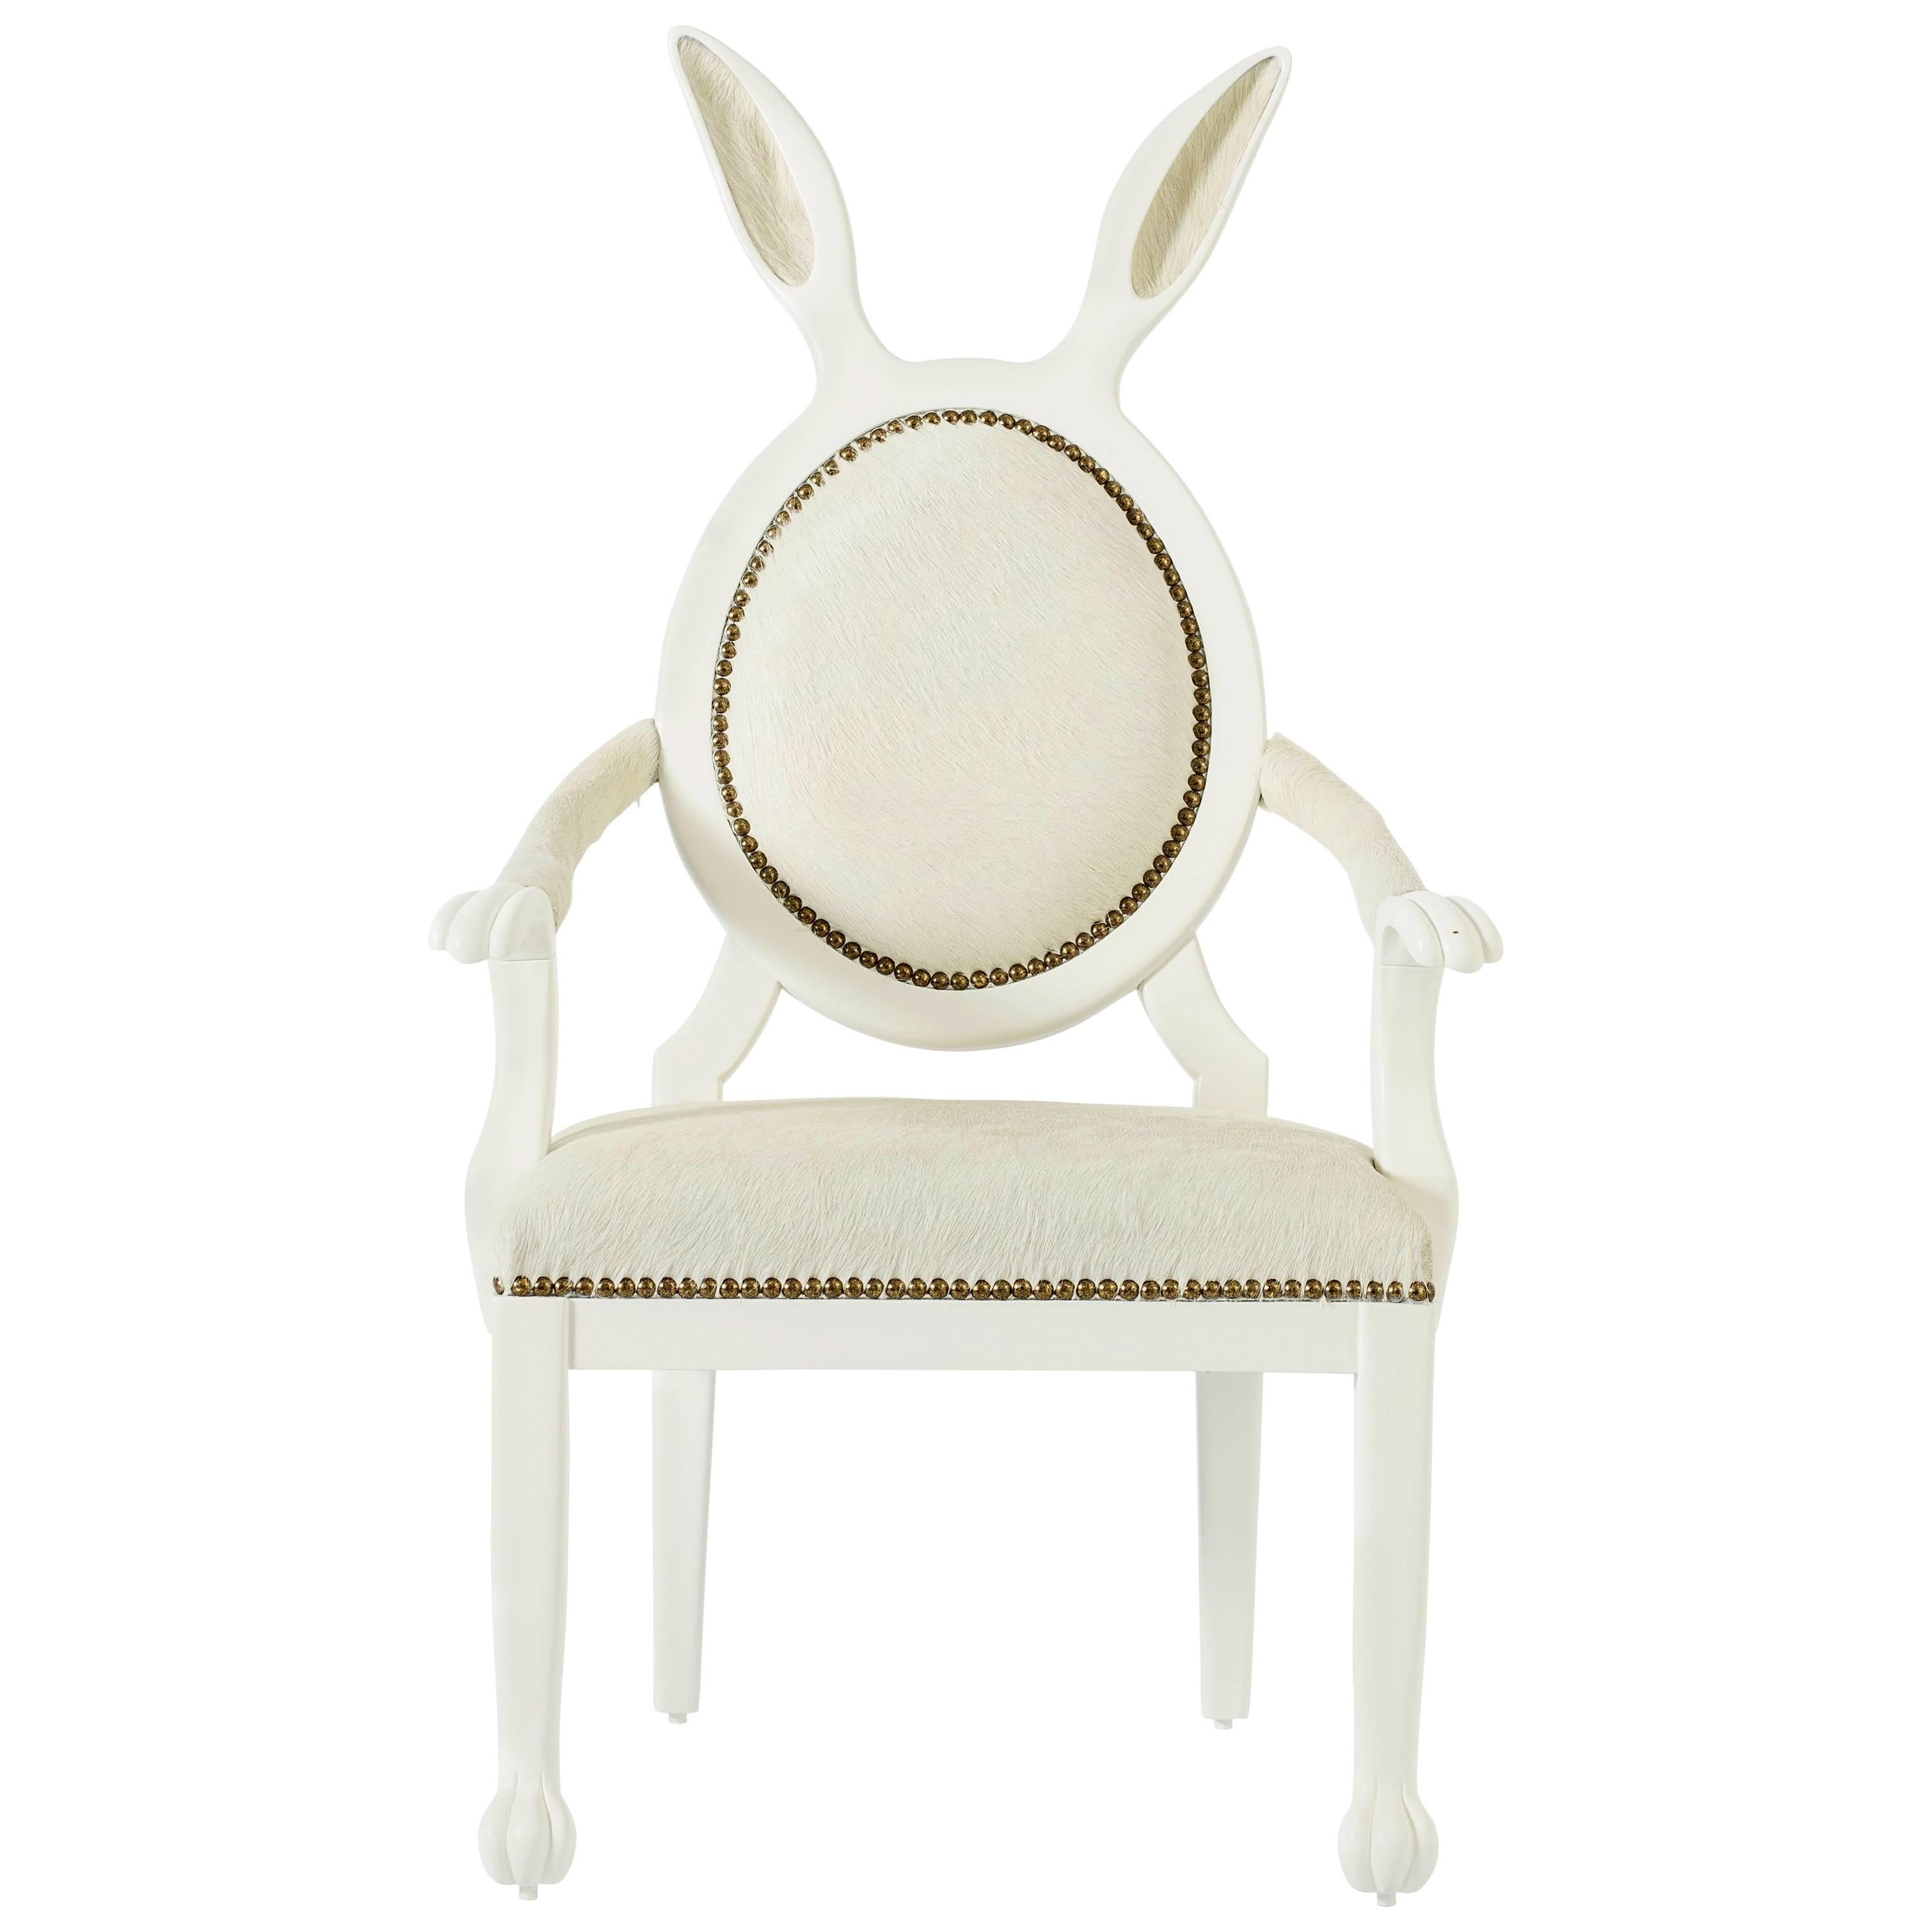 21st Century Hybrid No 2 Children's Armchair with Bunny Ears and White Leather